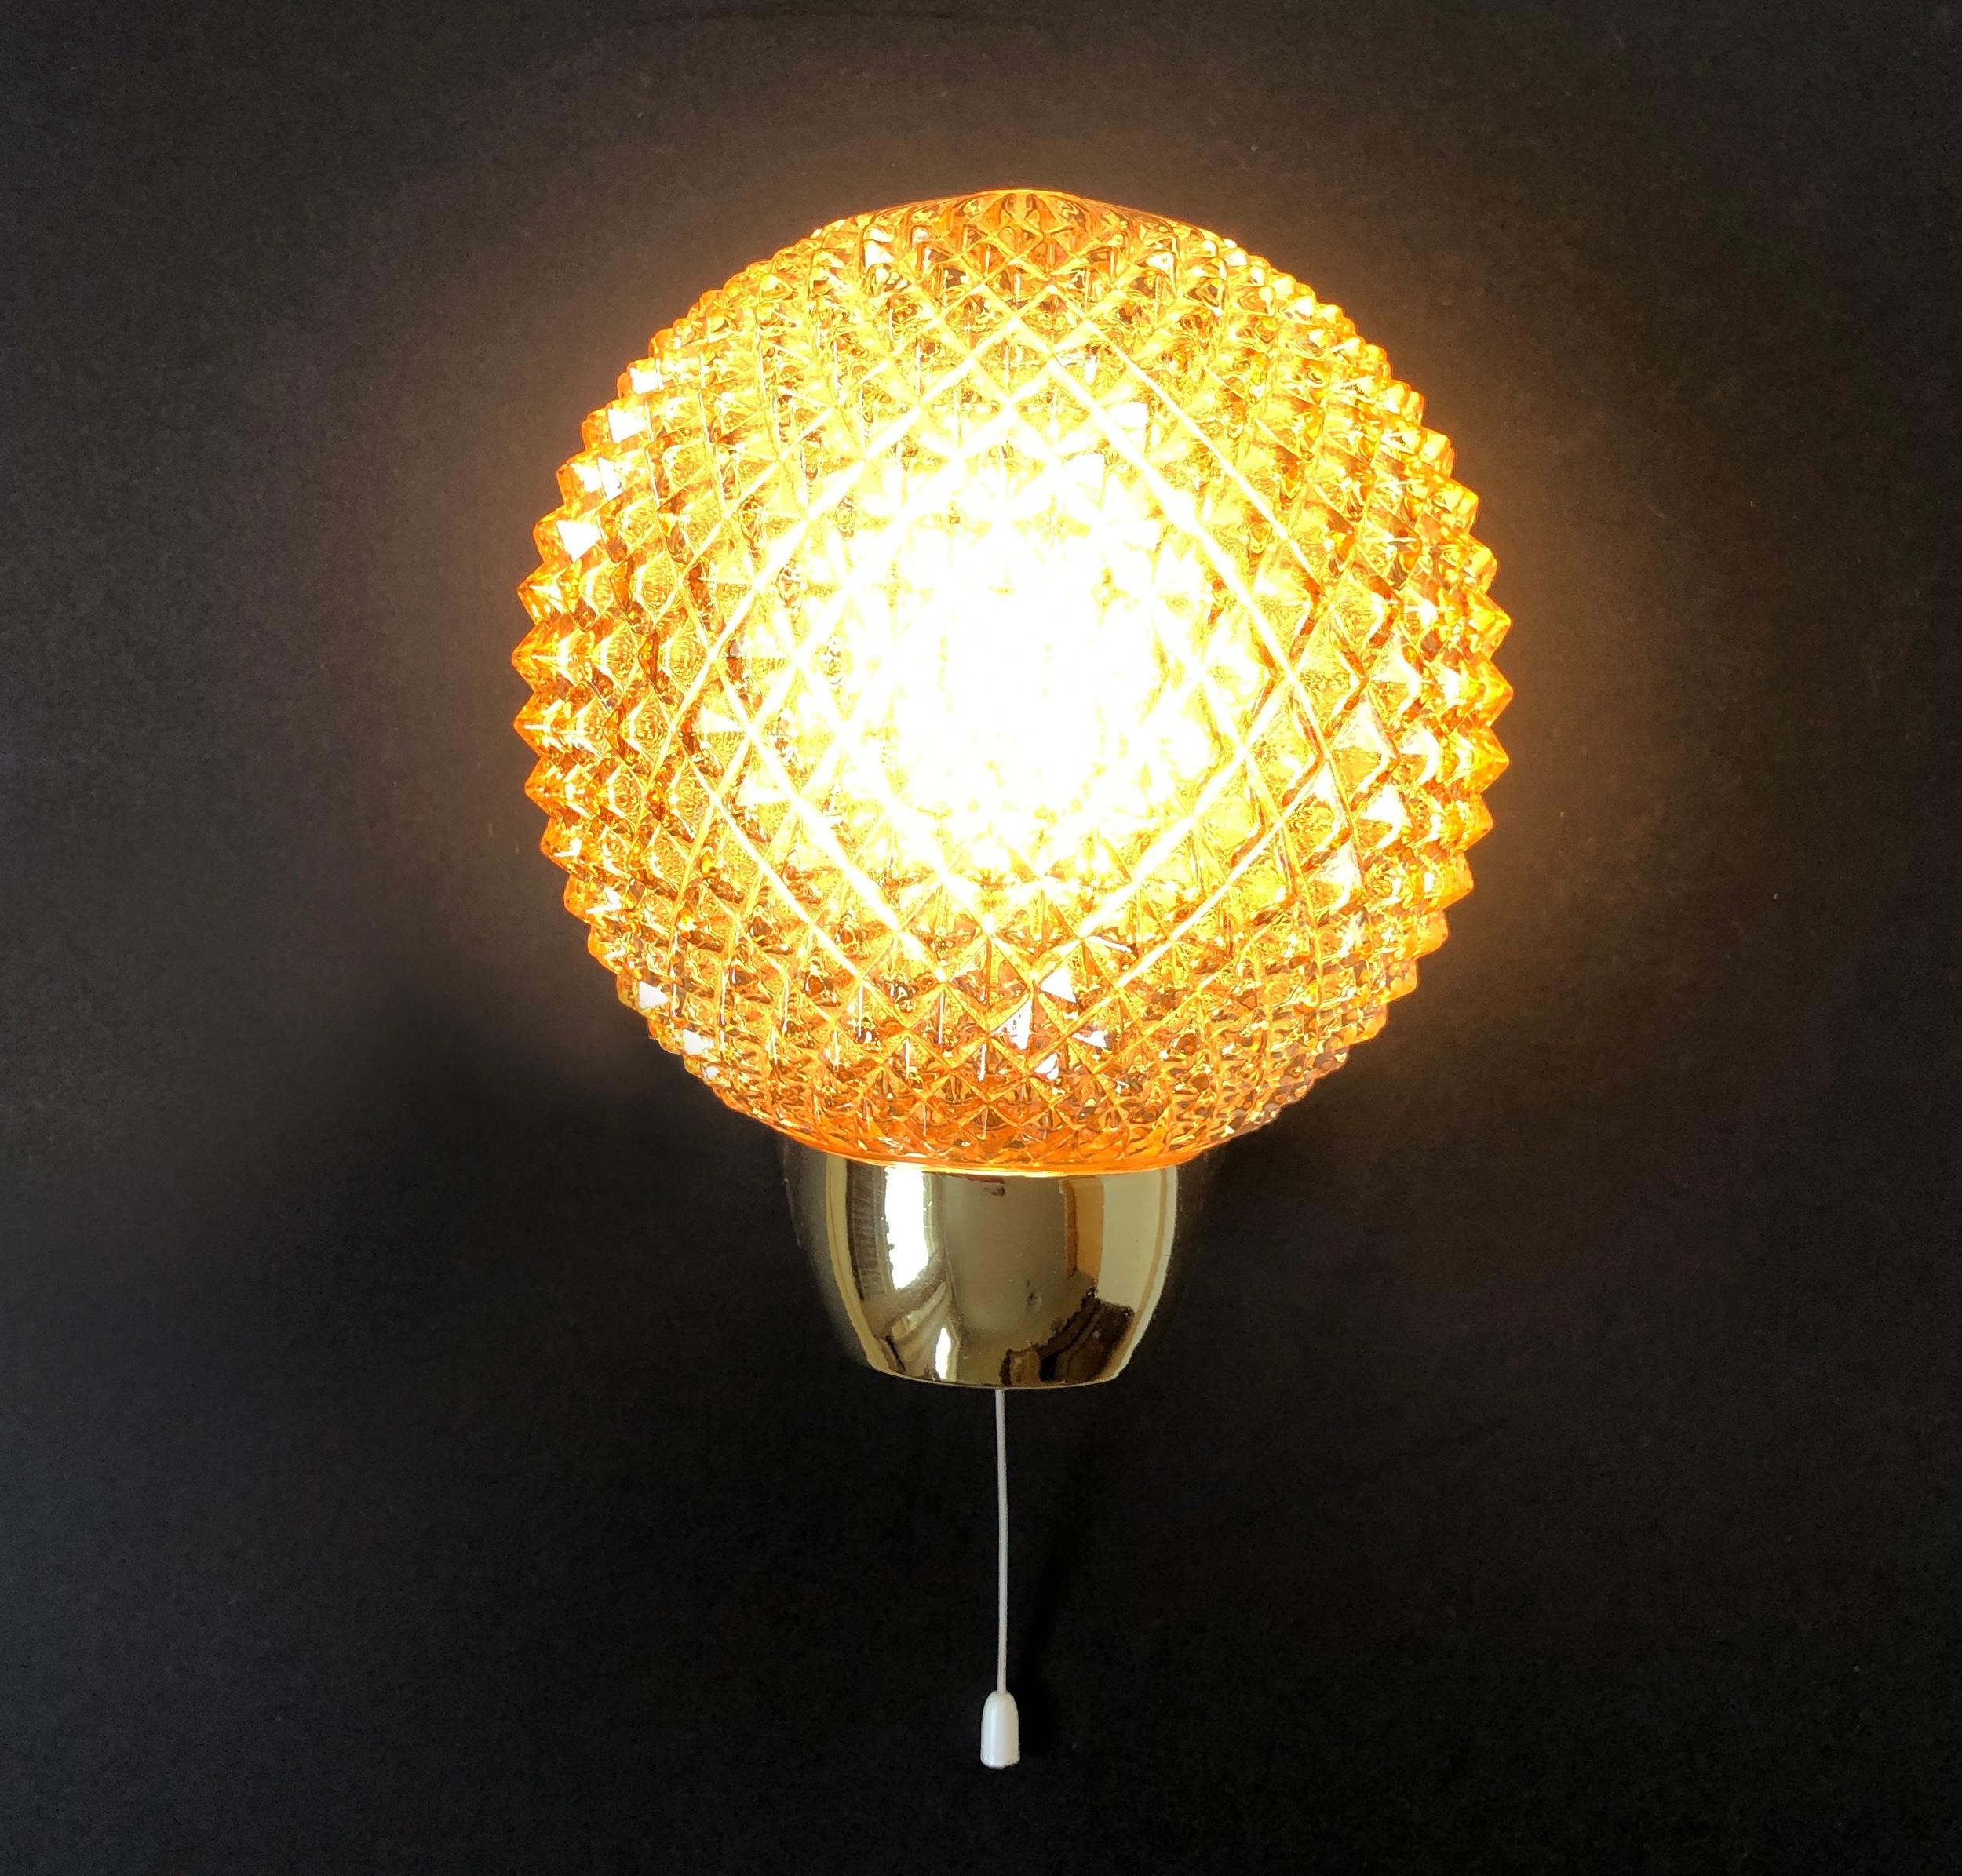 Beautifully designed wall lamps by 'RZB Leuchten', one of Germany's famous mid century manufacturer of high-end design lighting.
Come in a round shape, spiky like Mexican cacti: made from transparent glas: gold shimmering with a kind of soap bubbles